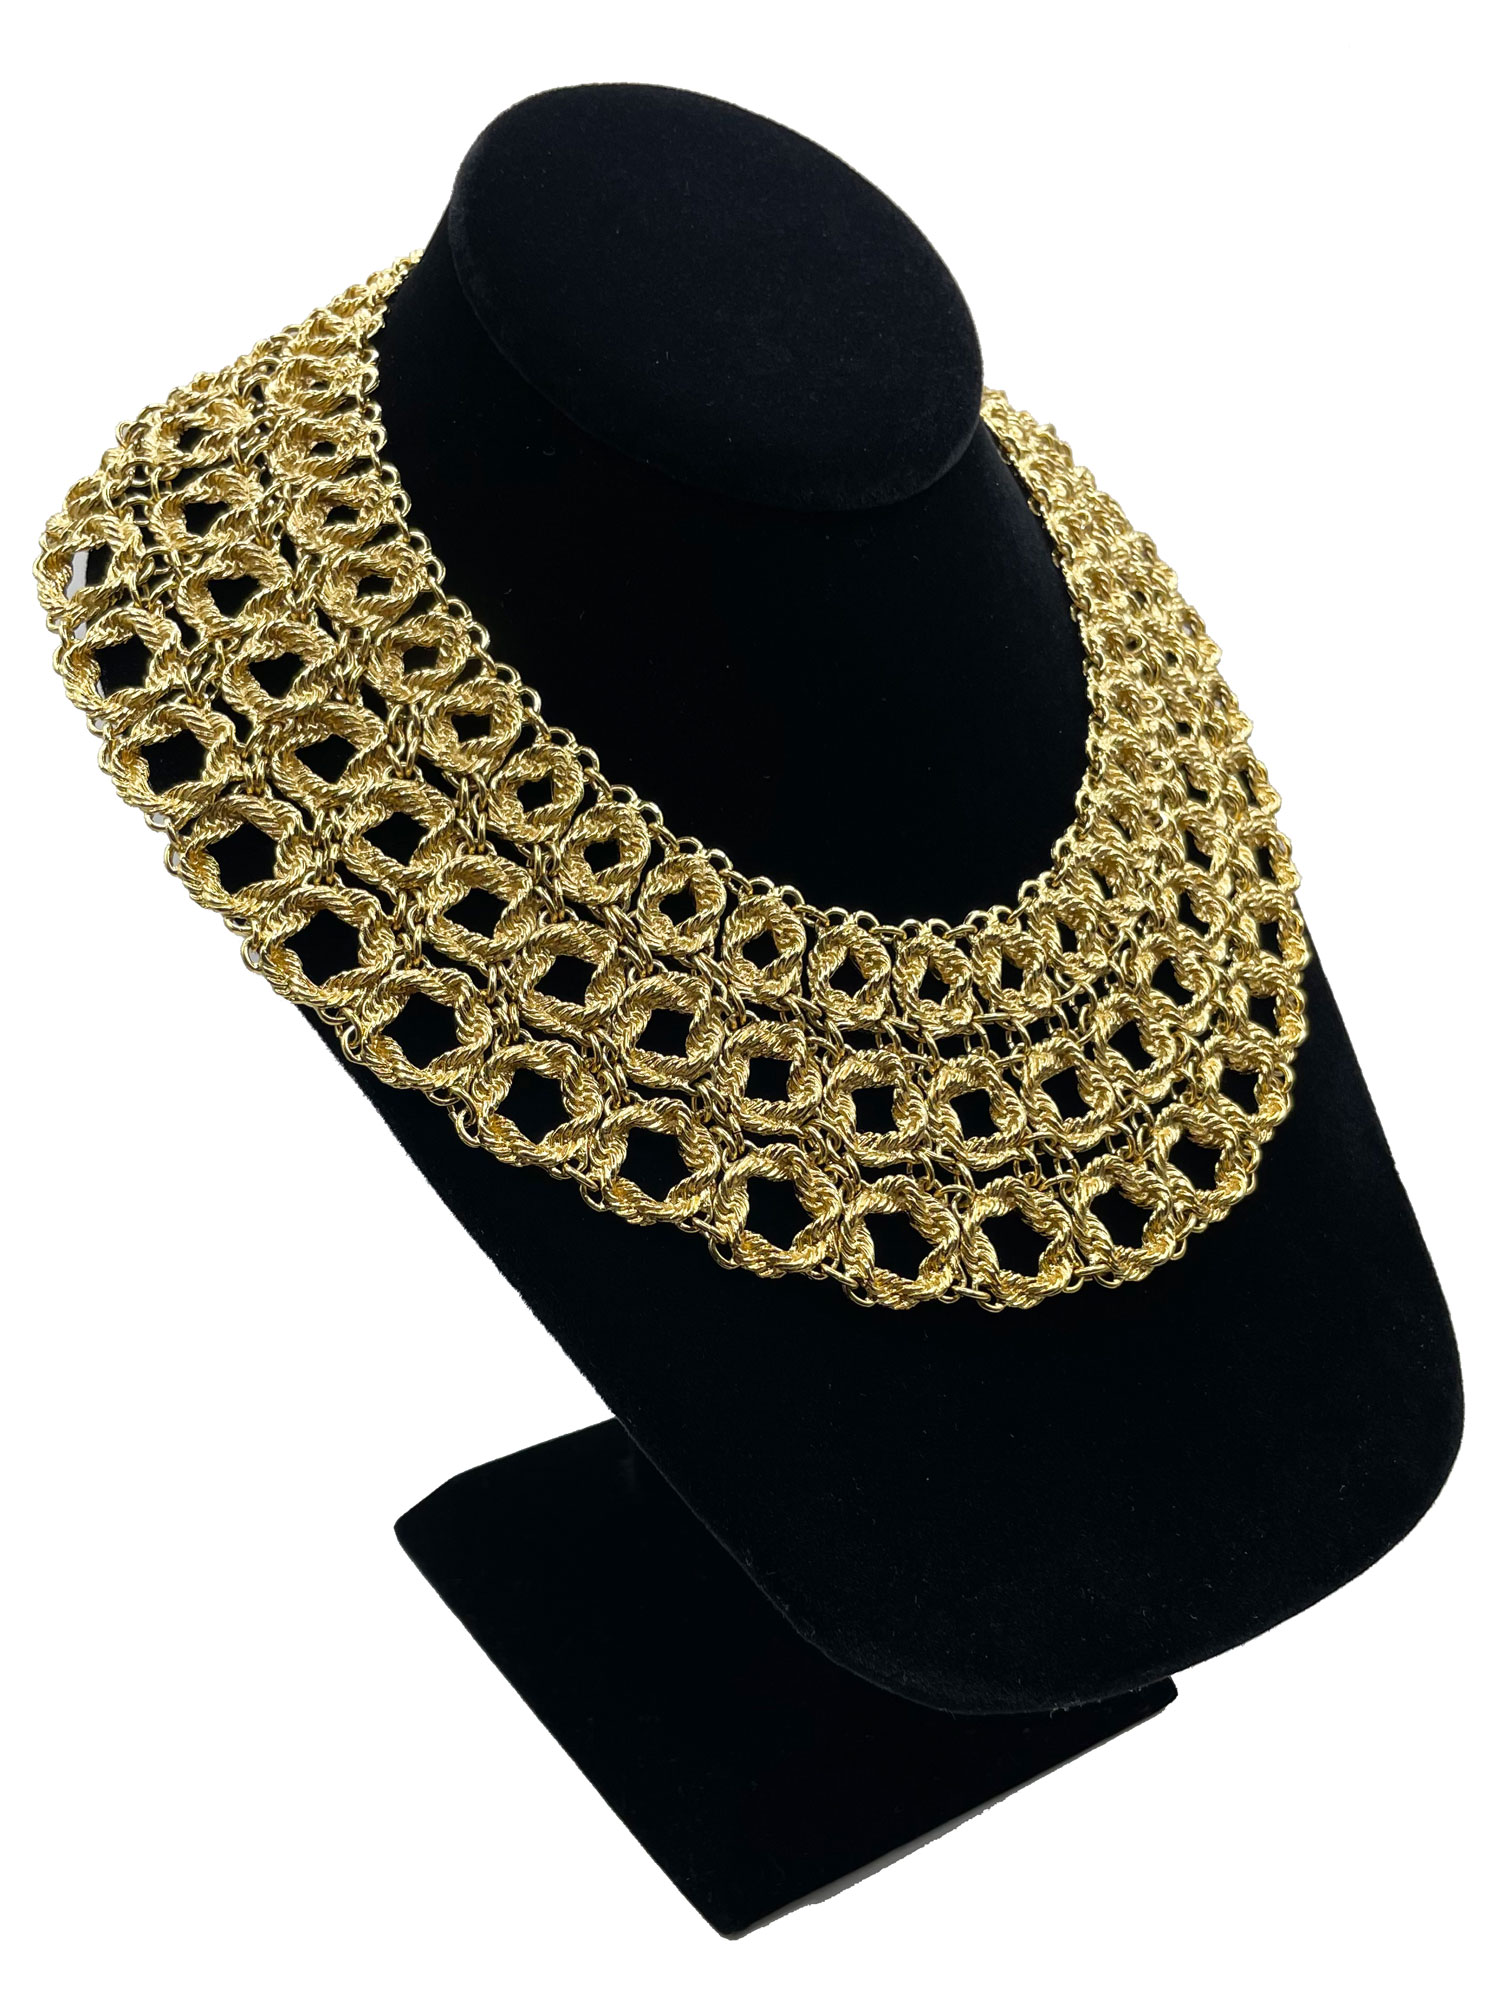 Collar necklace by Monet